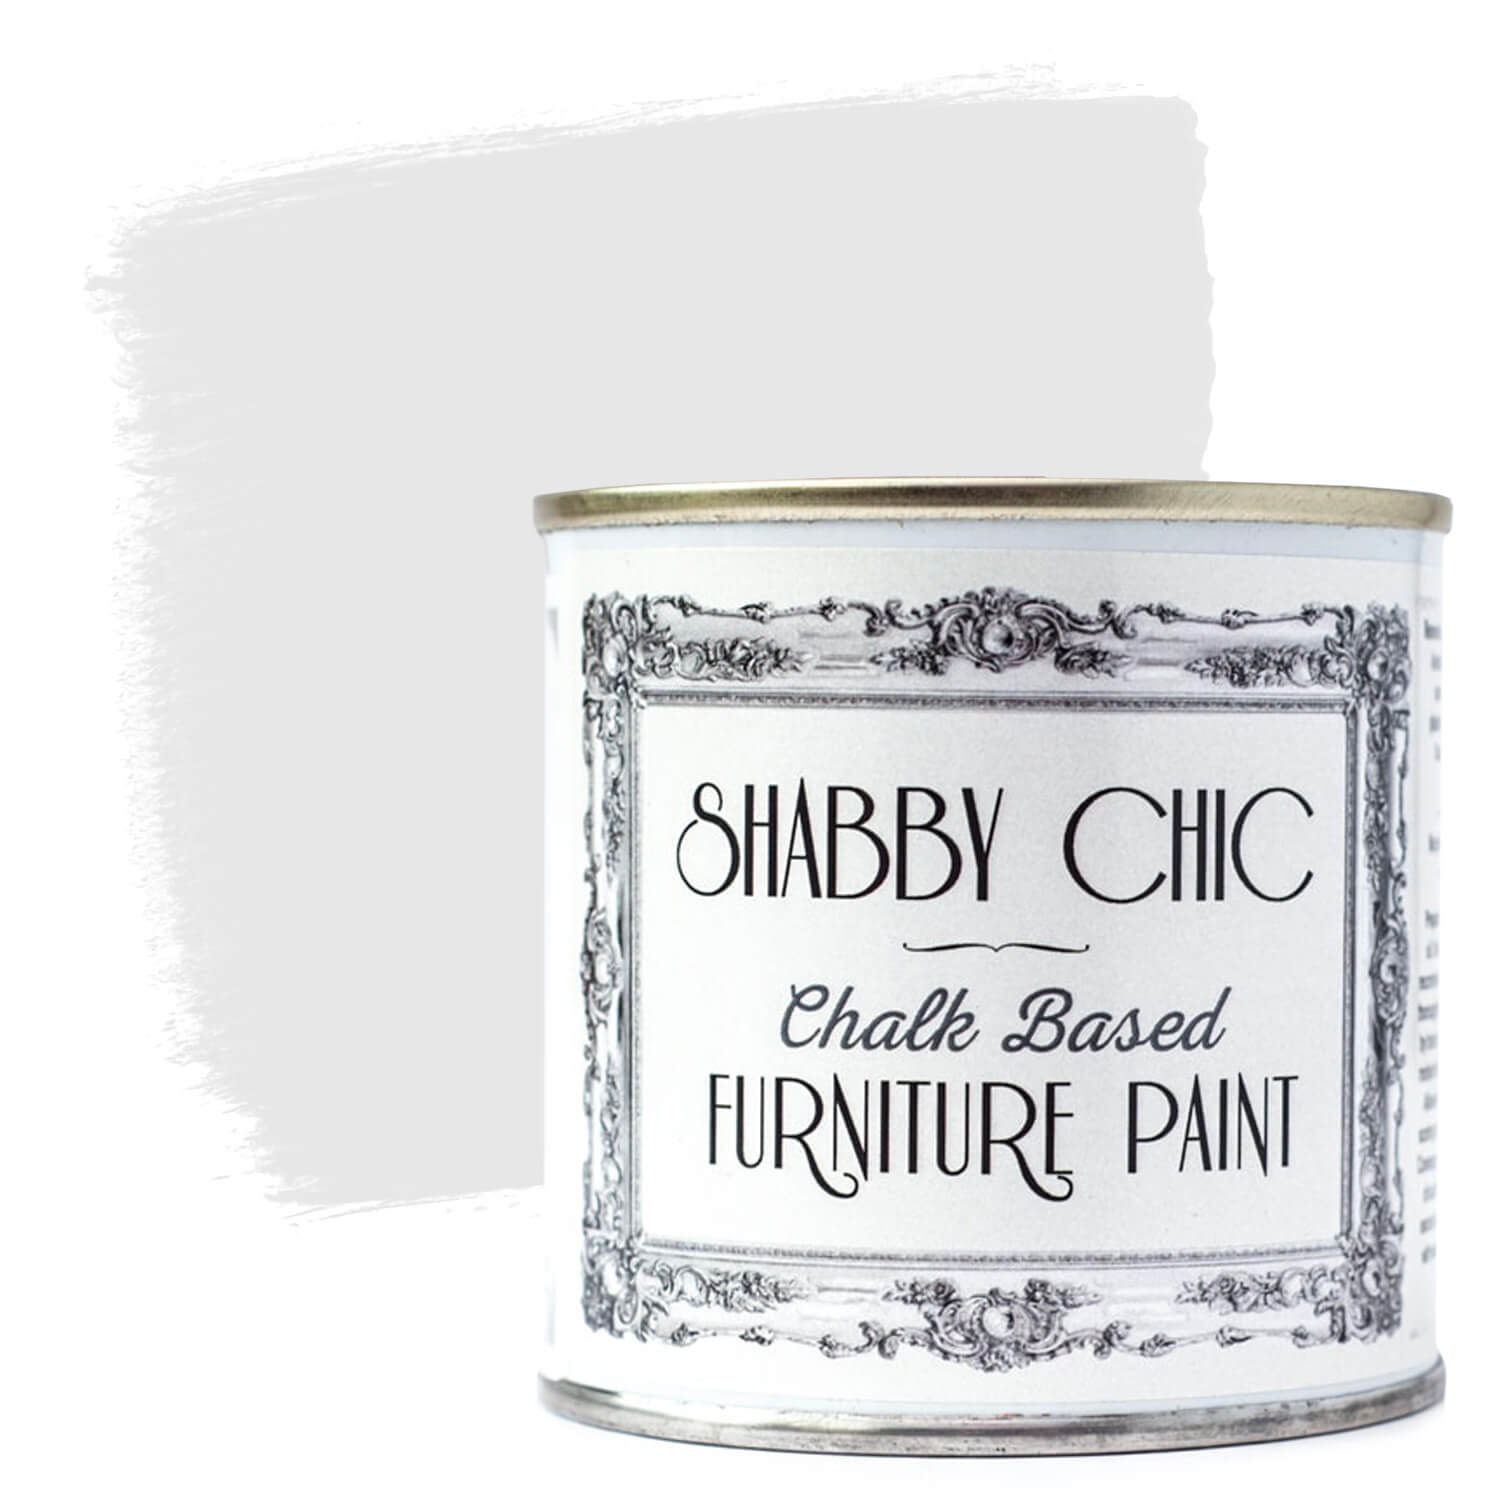 Shabby Chic Furniture Paint in Chalky White